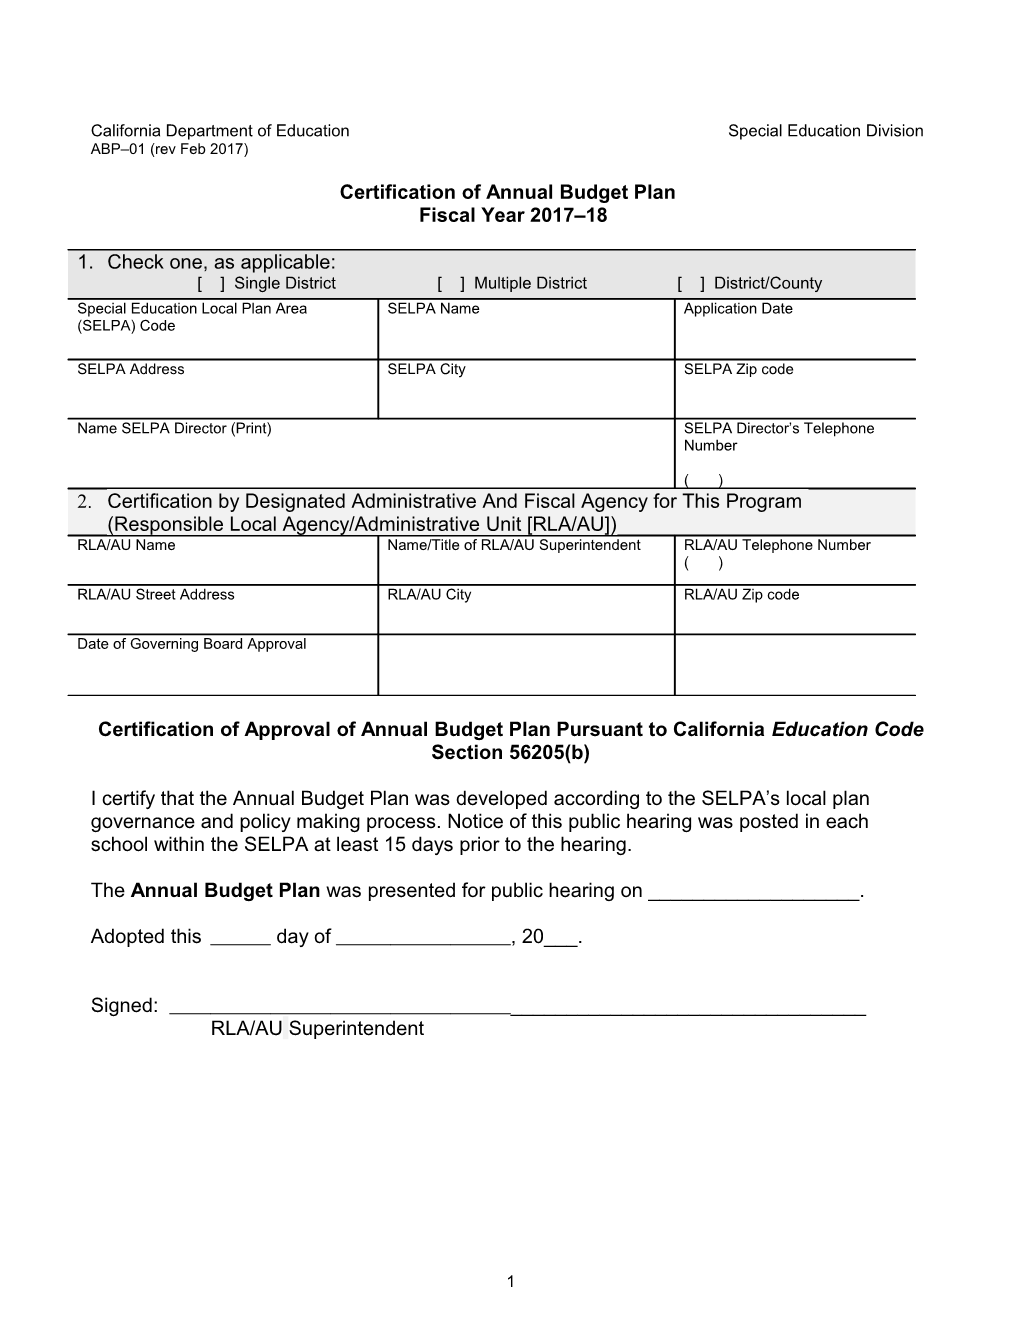 ABP-O1 Budget Form - Data Collection & Reporting (CA Dept of Education)